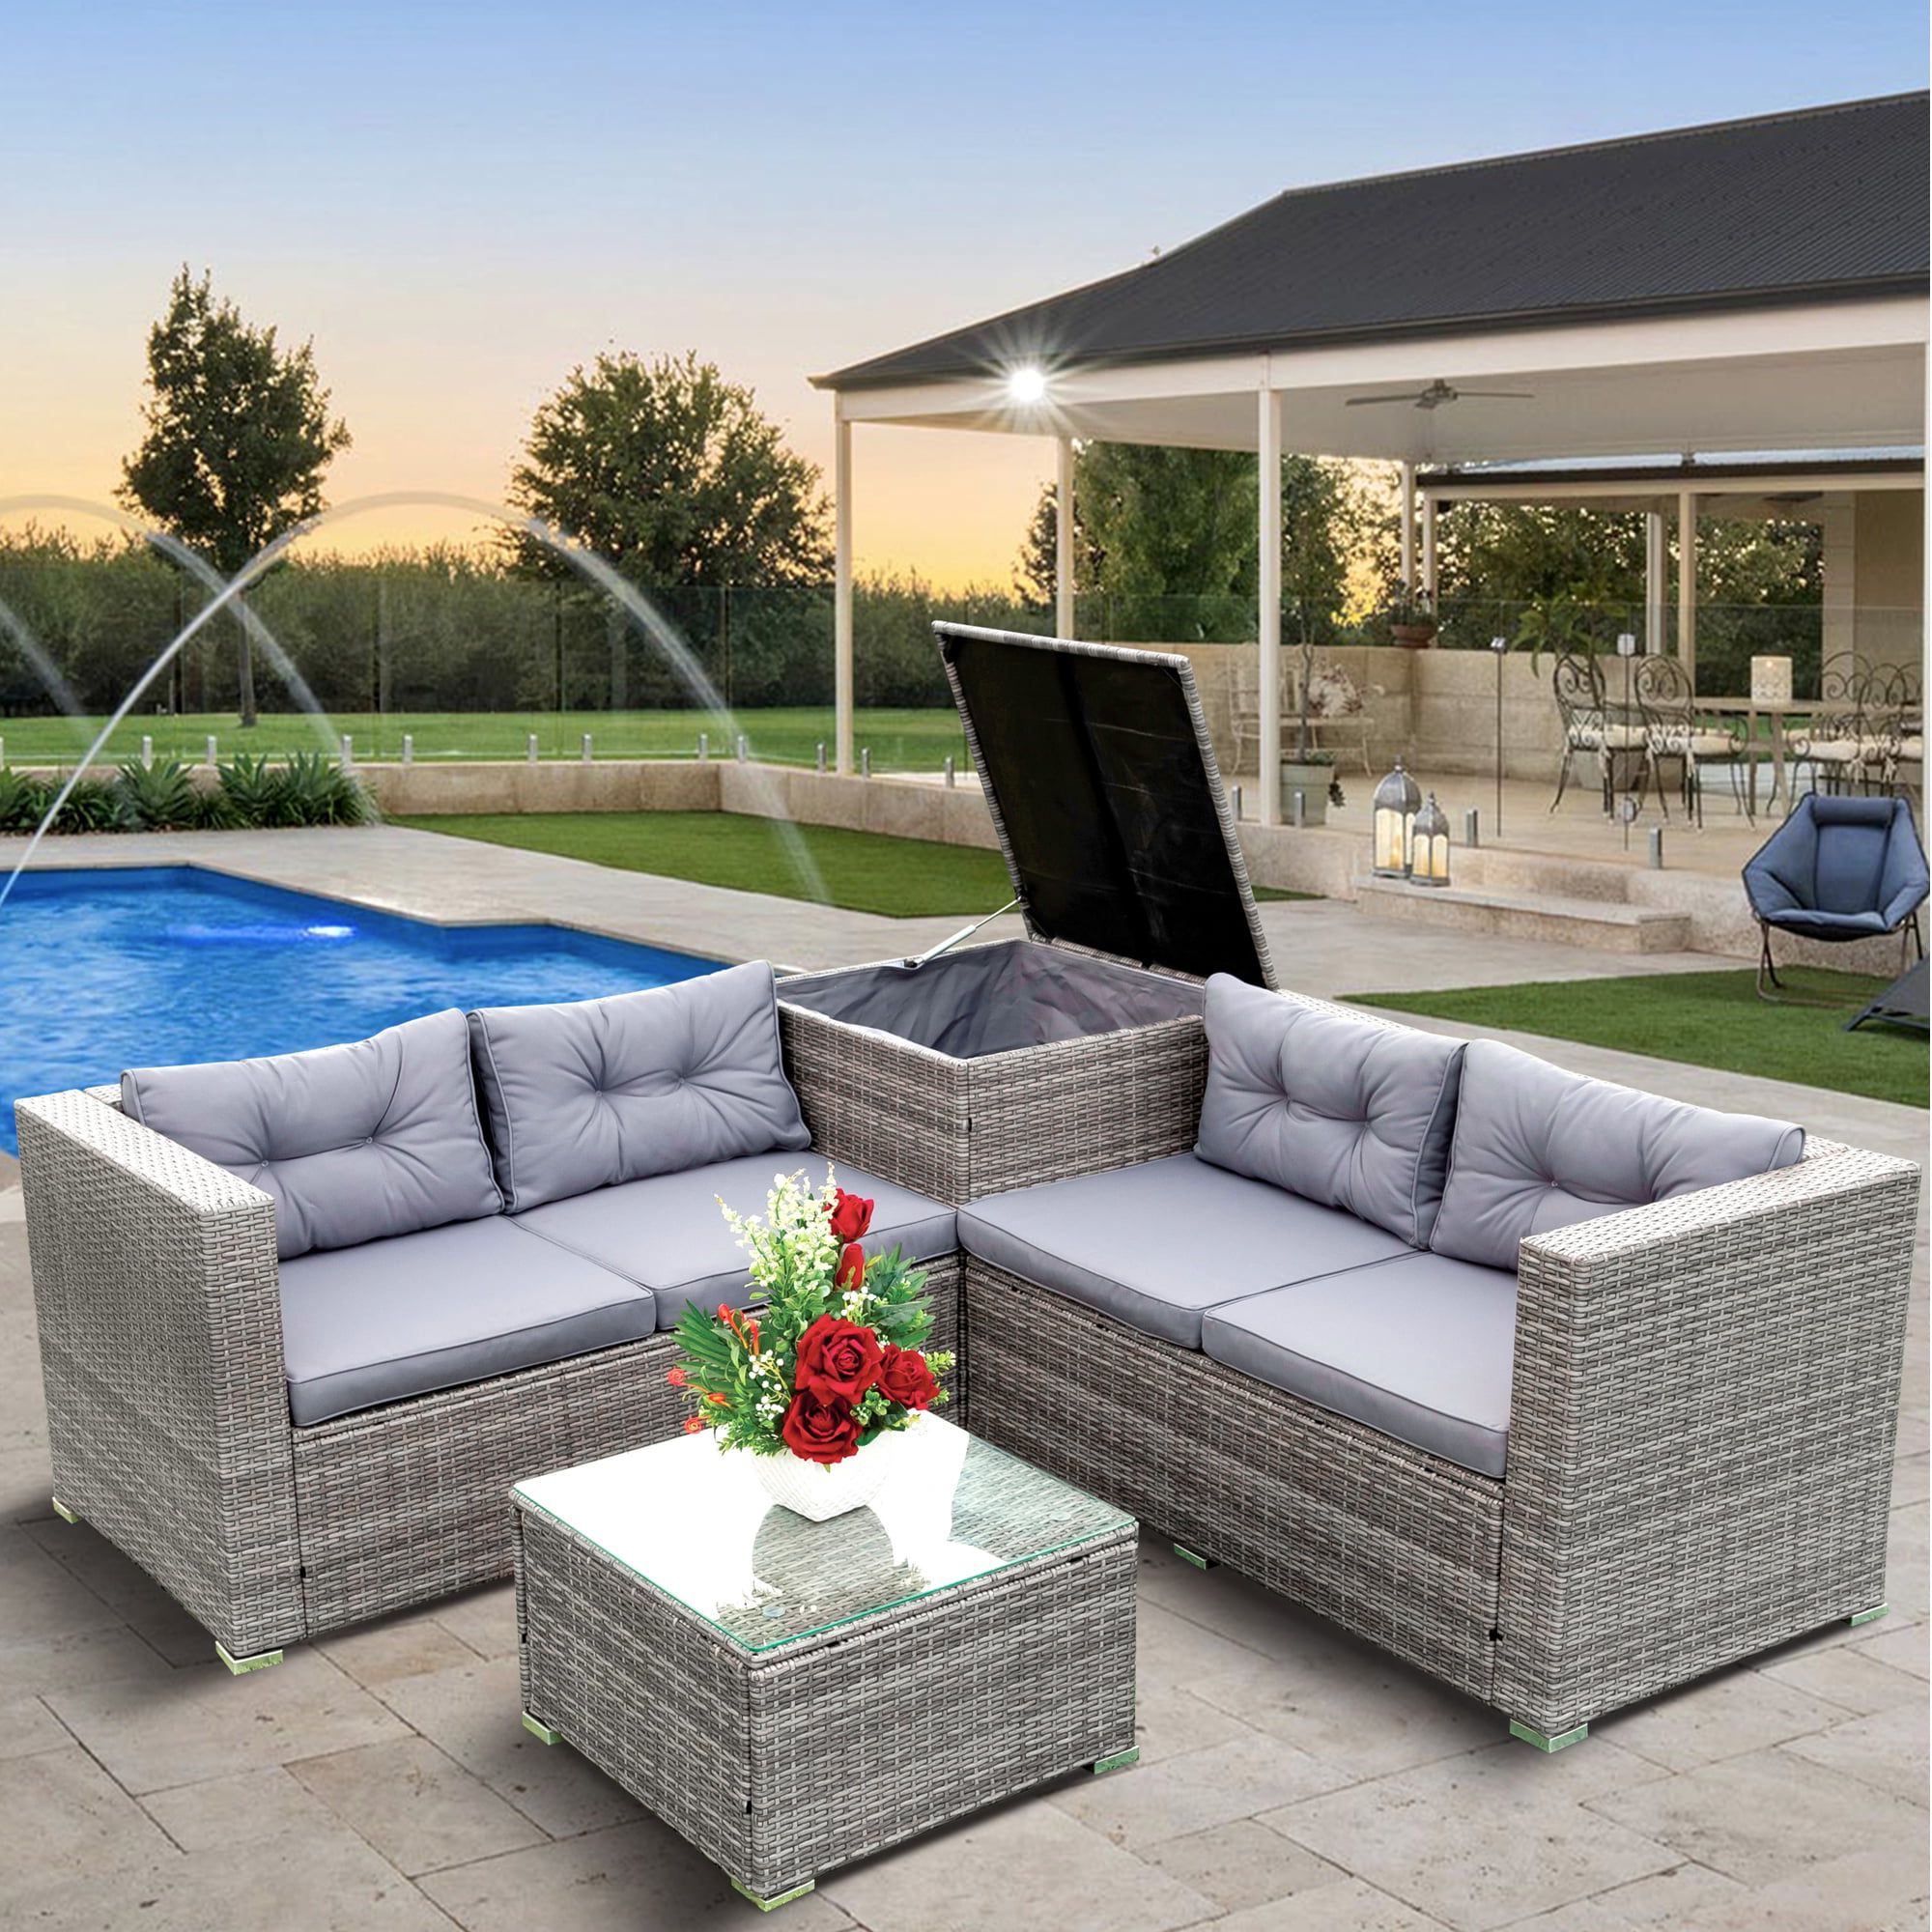 Well Liked Storage Table For Backyard, Garden, Porch Intended For 4 Piece Patio Dining Set, All Weather Outdoor Conversation Set With Storage  Ottoman, Wicker Sectional Sofa Furniture Set With Gray Cushions And Table  For Backyard, Porch, Garden, Poolside – Walmart (Photo 12 of 15)